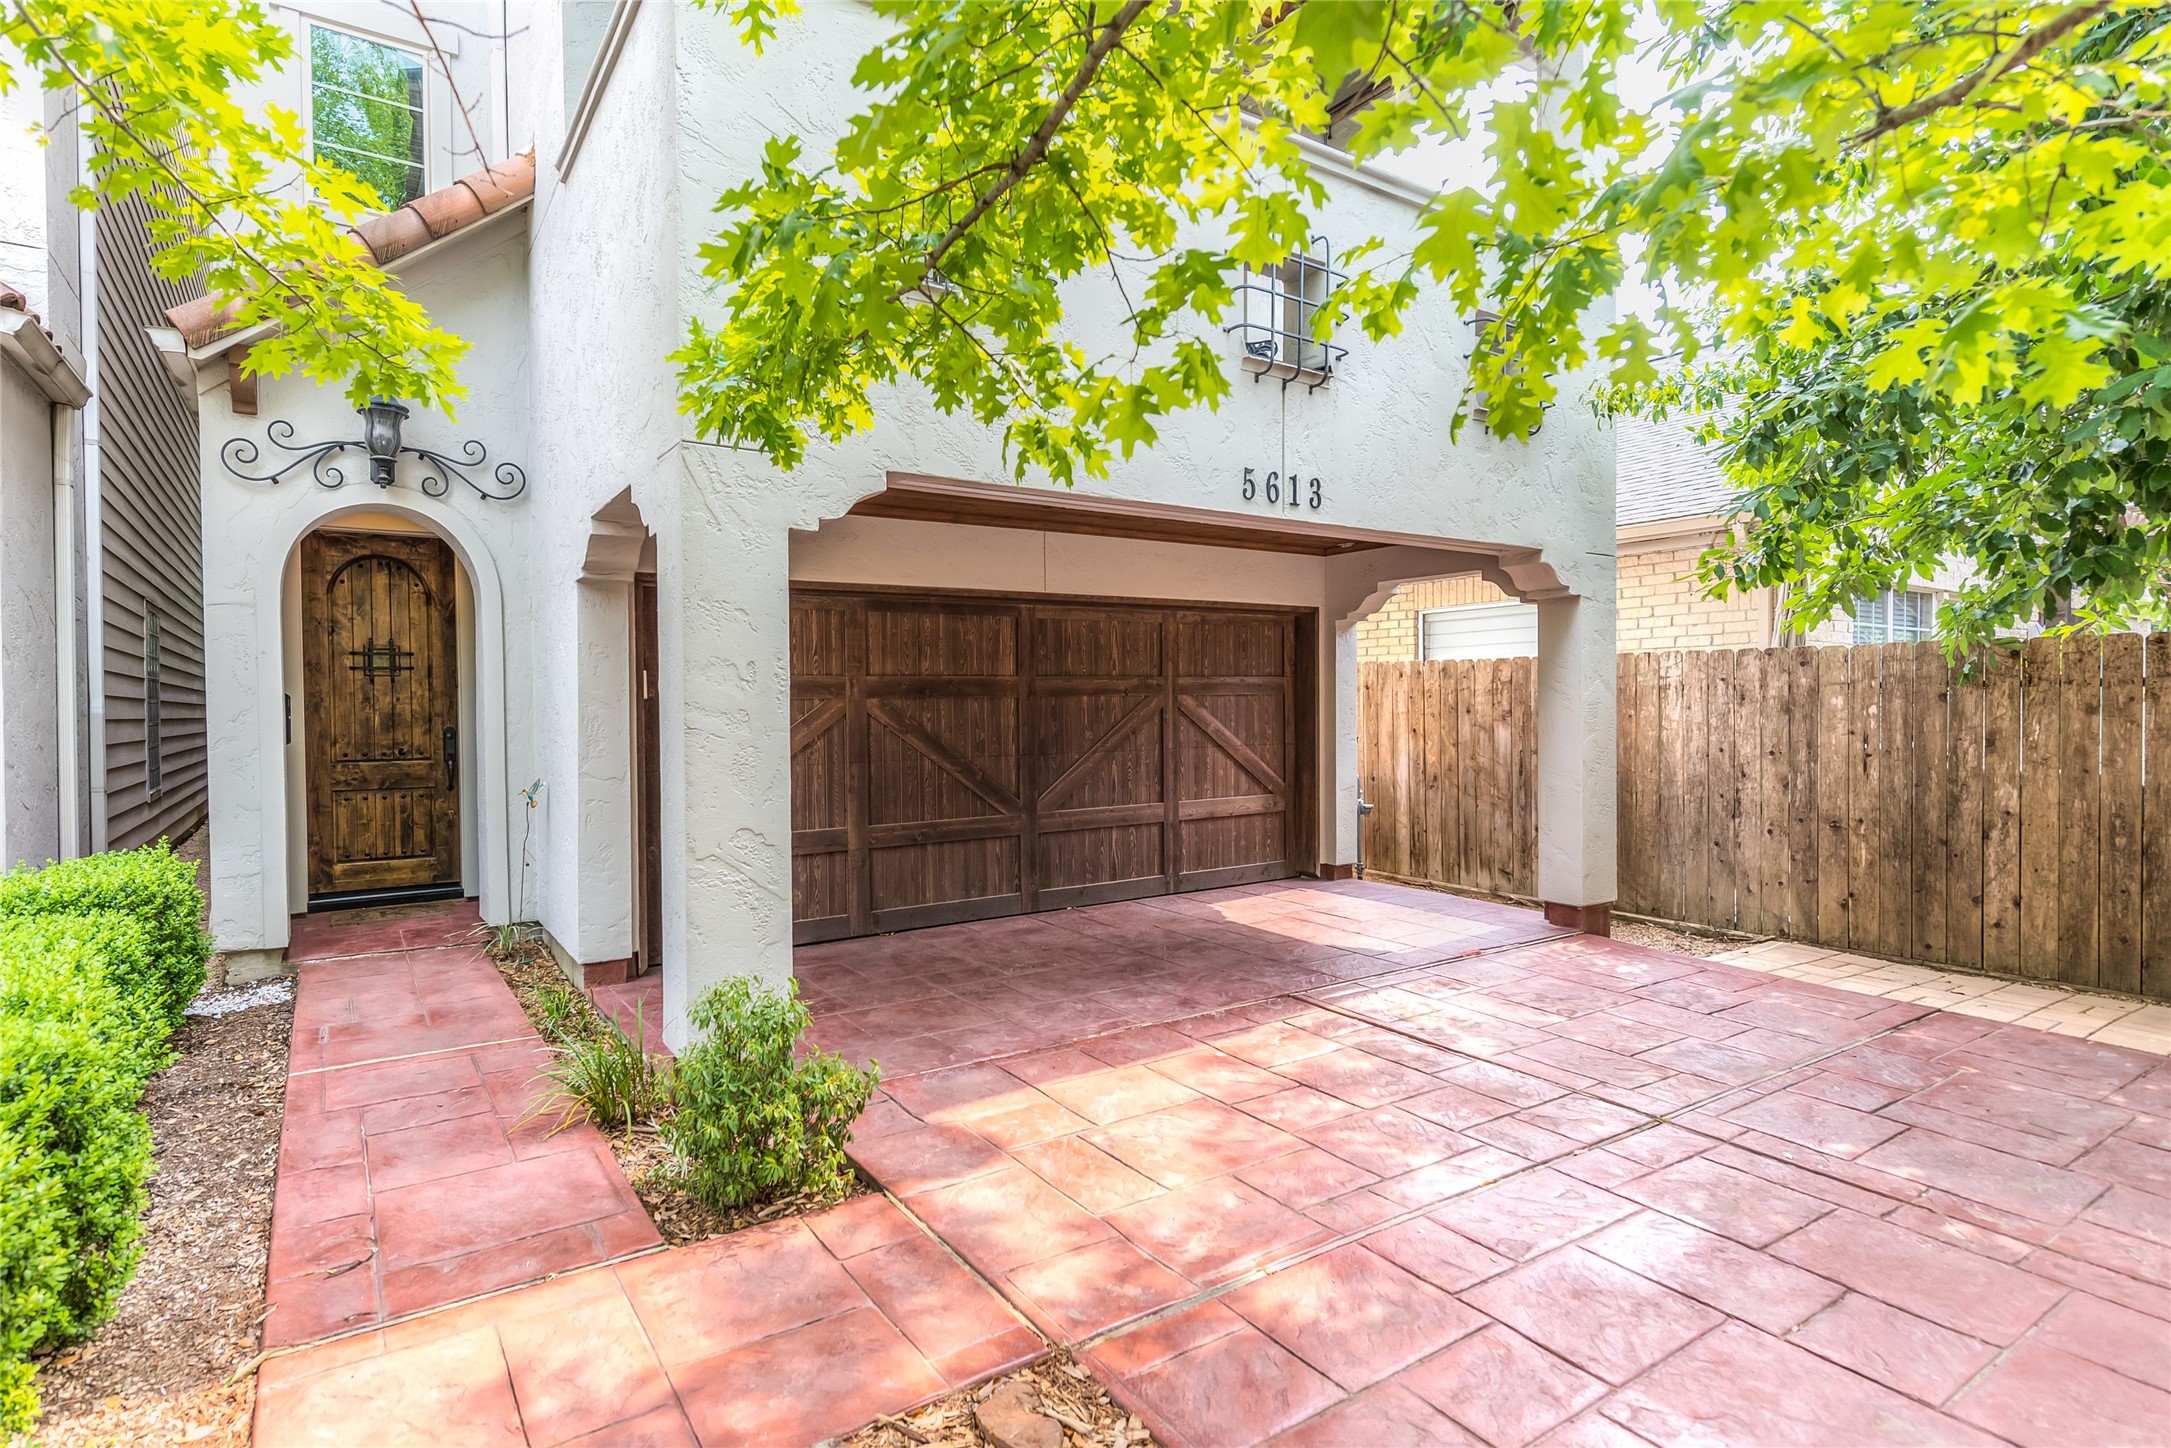 Terrific mediterranean patio home nestled along a quite, tree lined street in the sought after neighborhood of Rice Military.